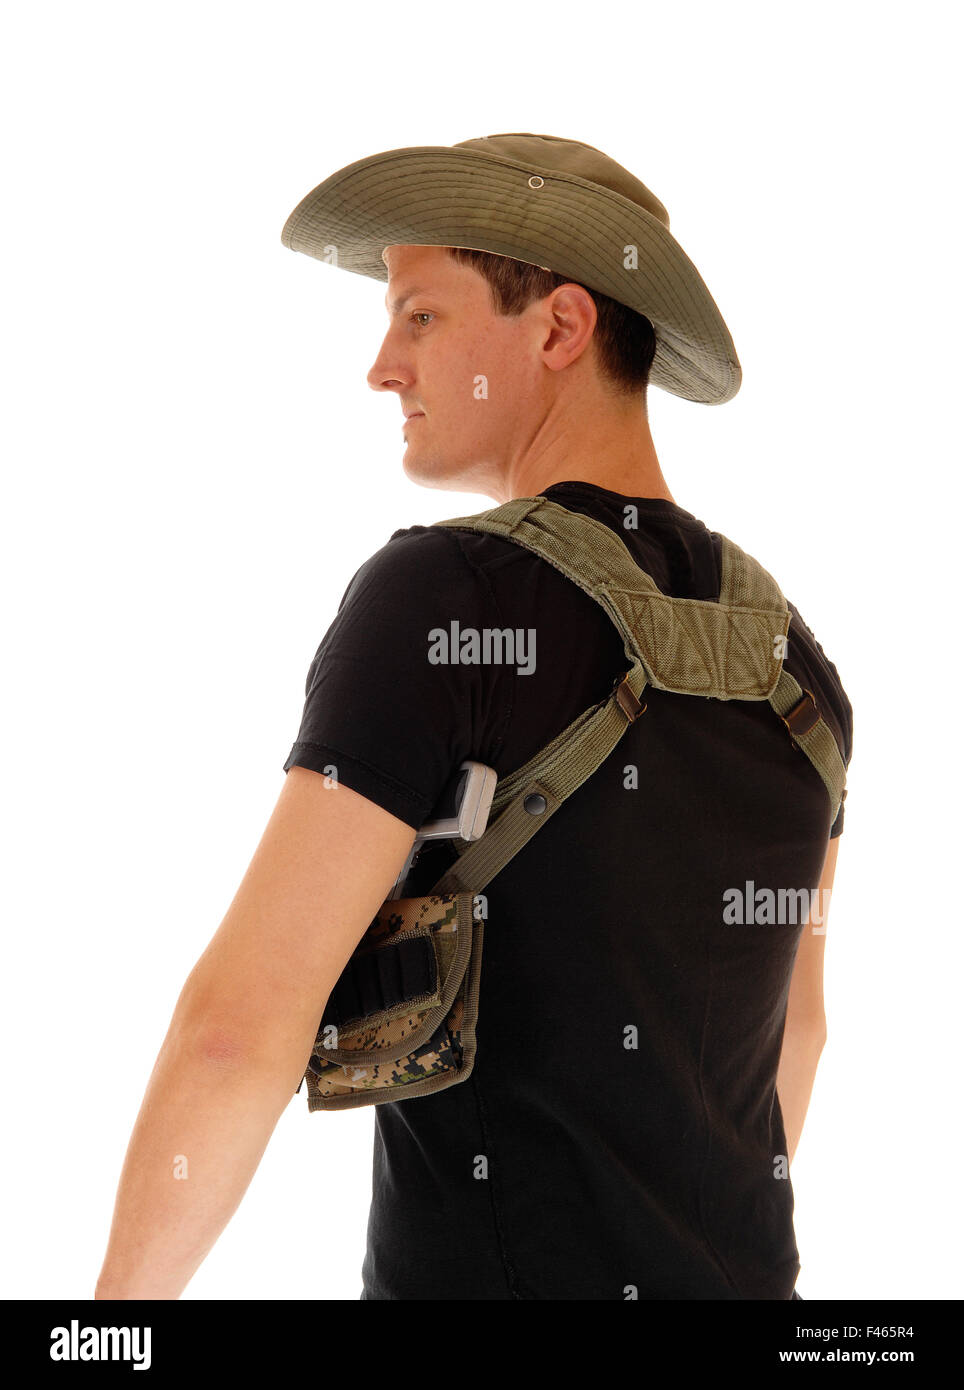 Soldier with gun holster. Stock Photo